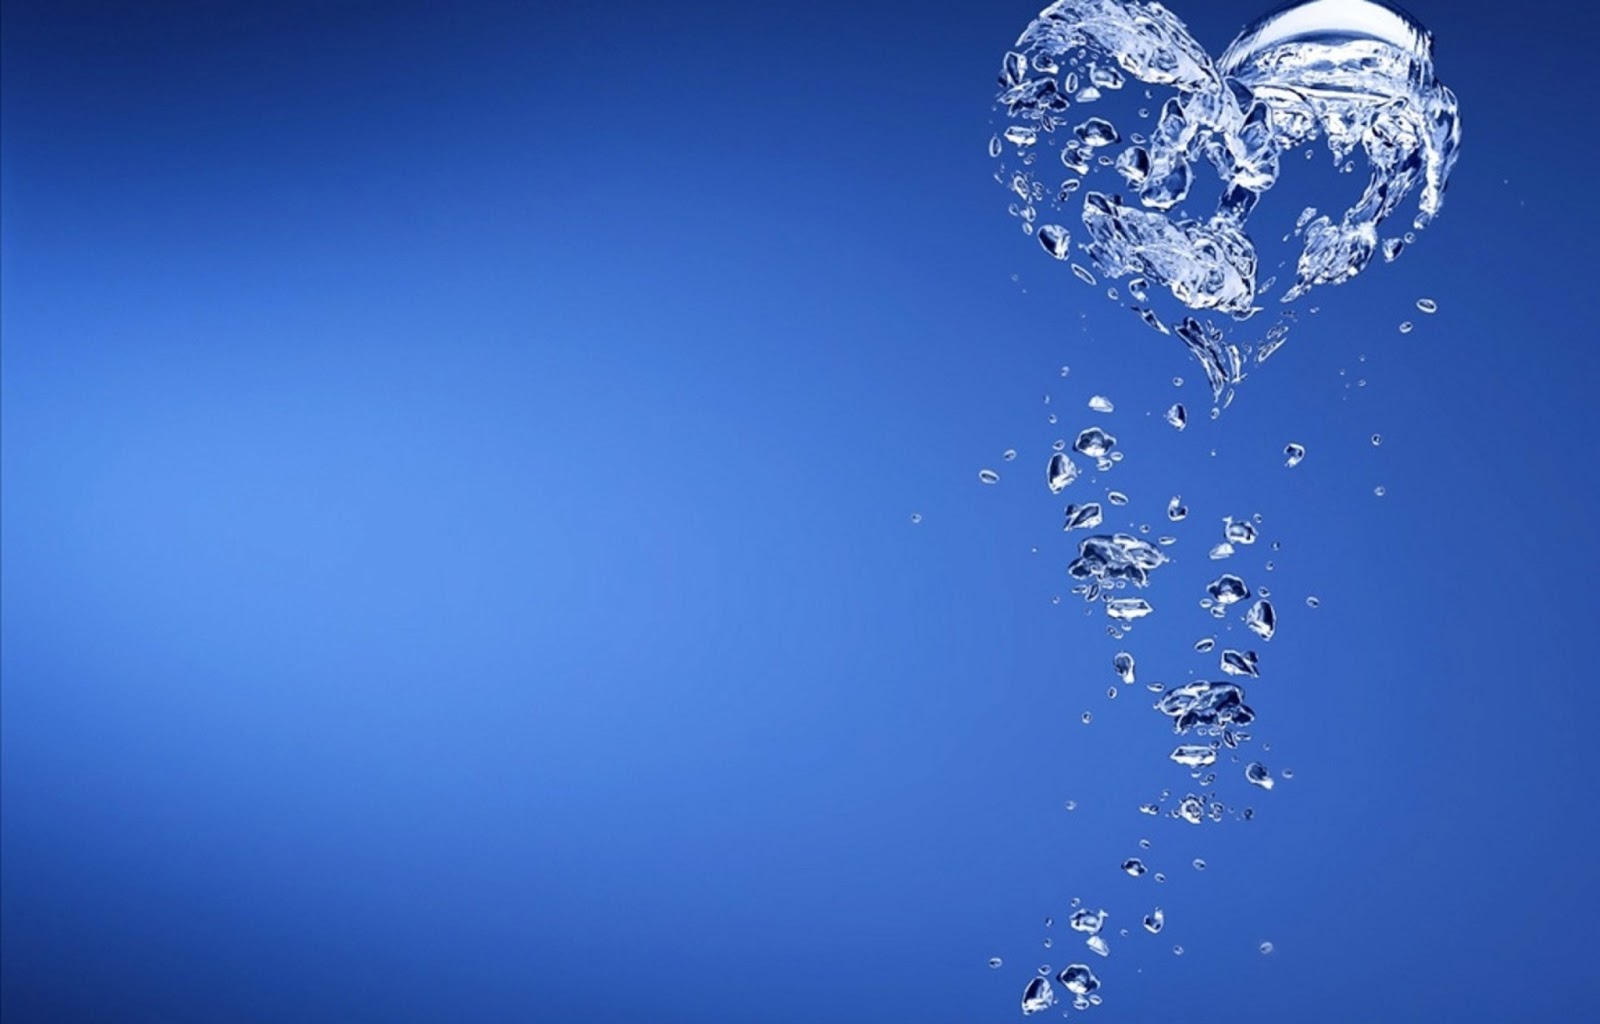 Abstract Water HD Wallpapers | HD Wallpapers (High Definition) | Free